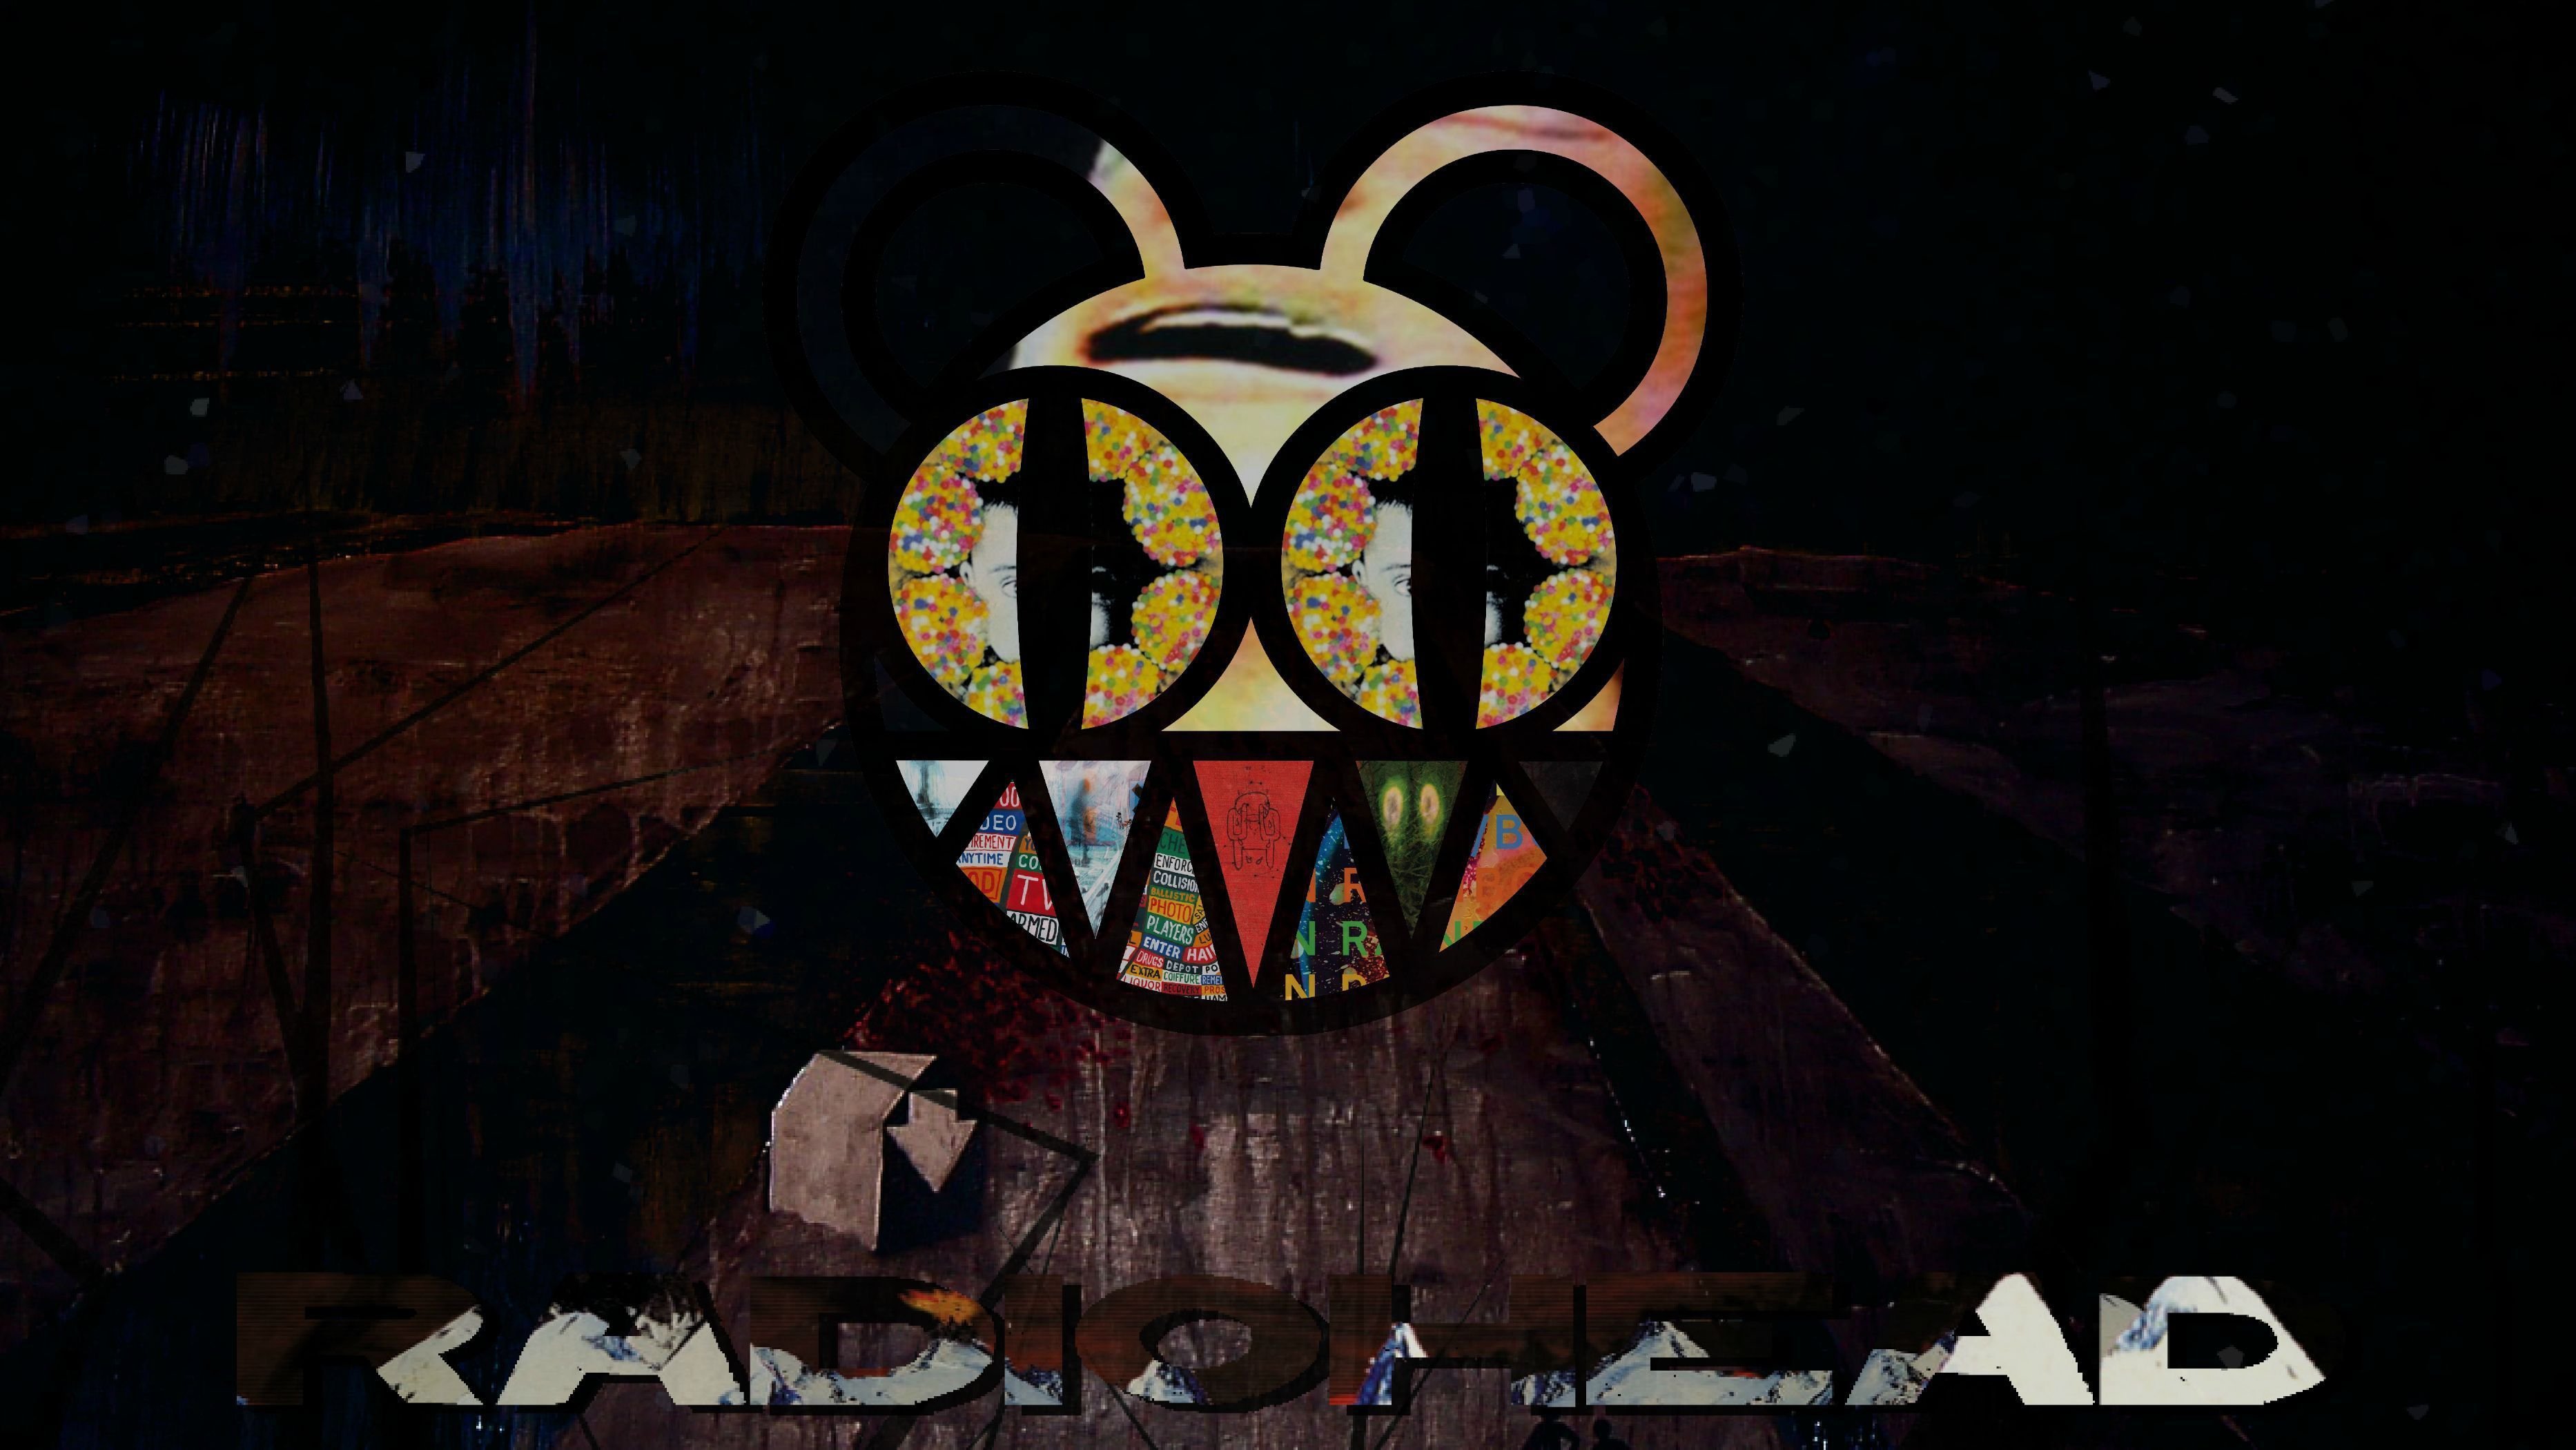 Radiohead Wallpaper Image Photo Picture Background